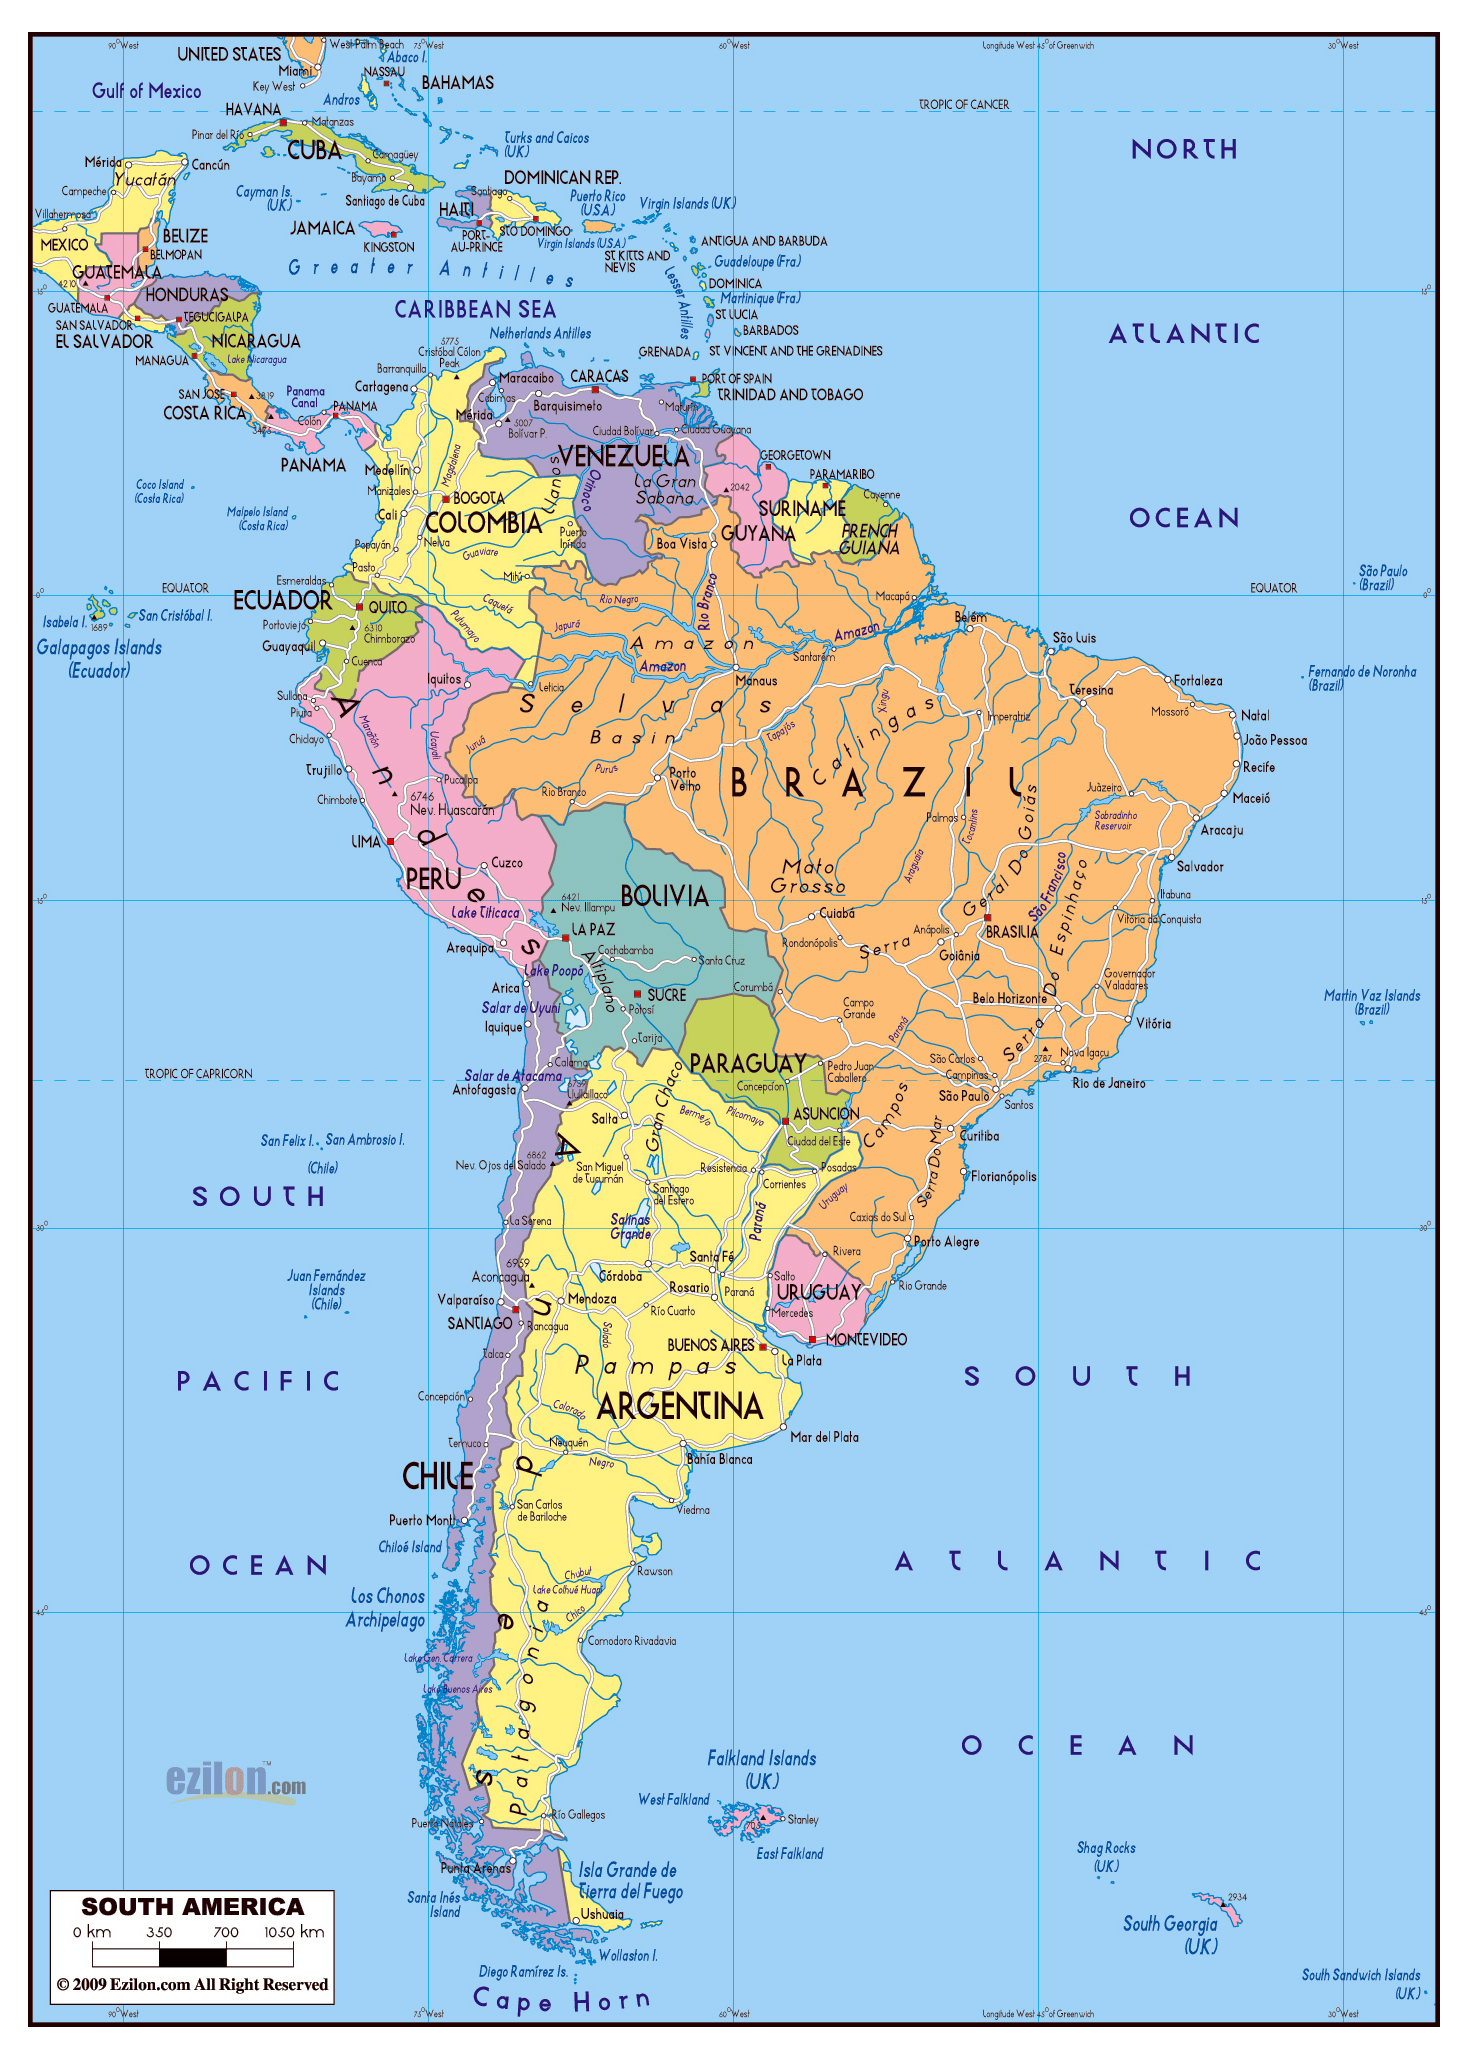 a map of south america with all the countries/regions